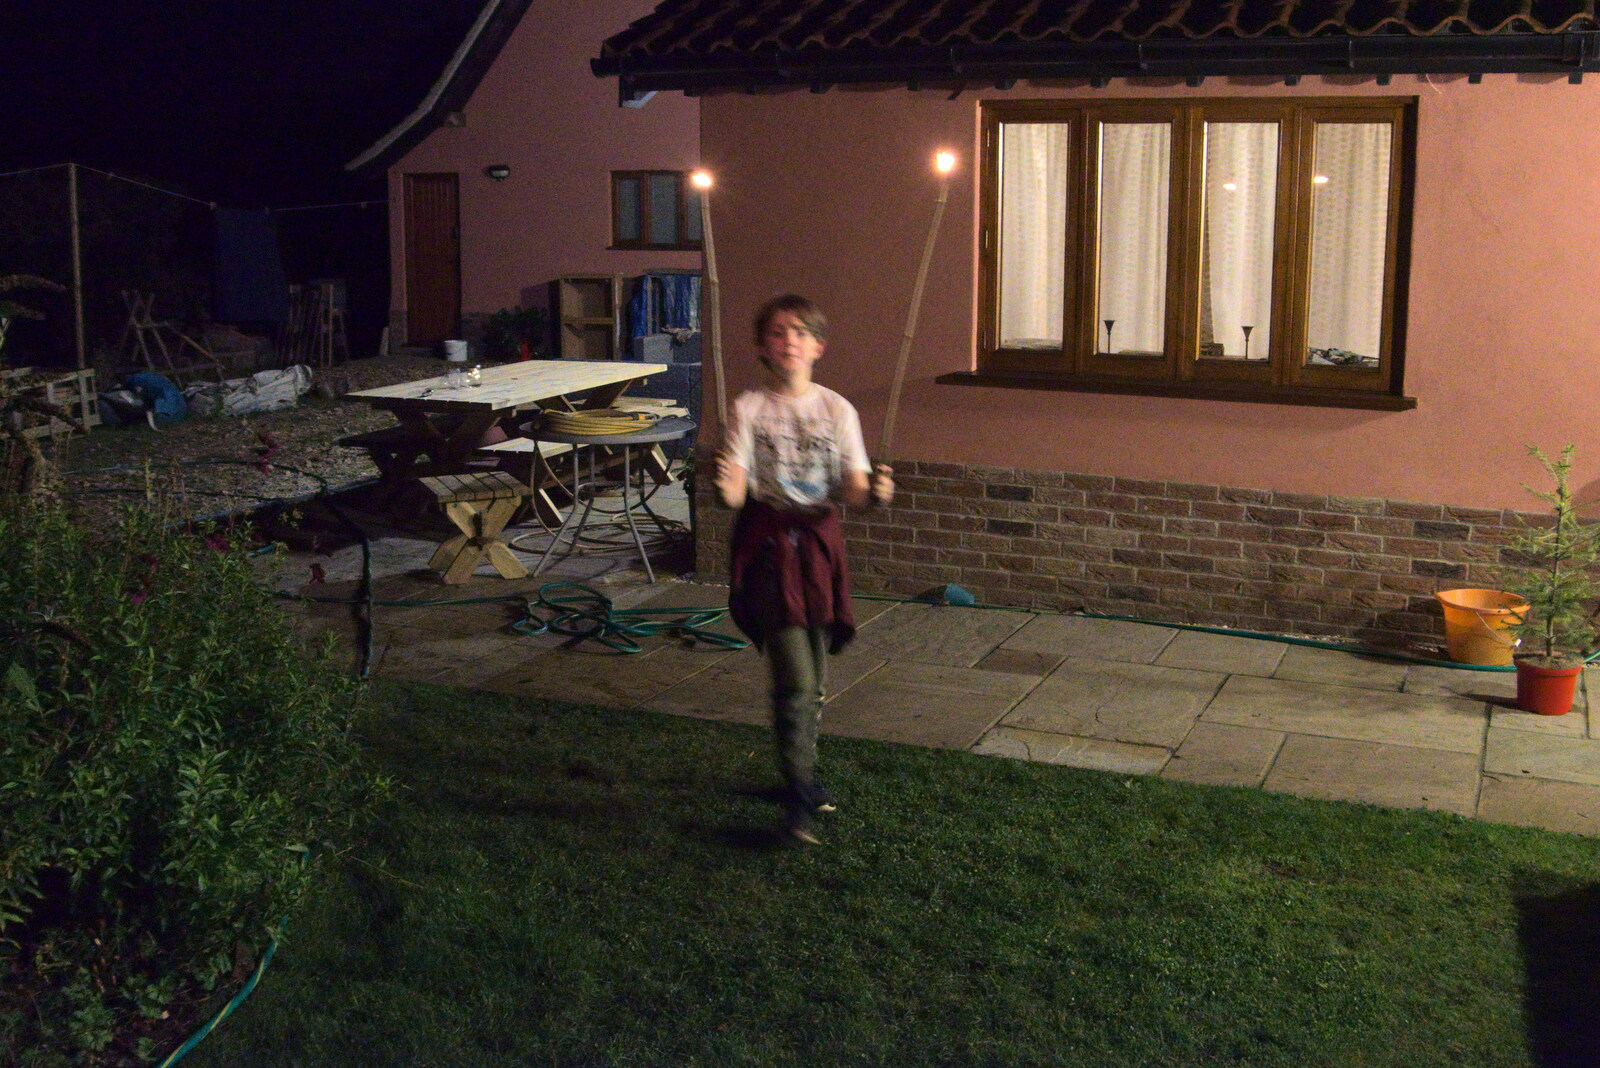 Fred walks around with glowing sticks from To See the Hairy Pigs, Thrandeston, Suffolk - 7th November 2020